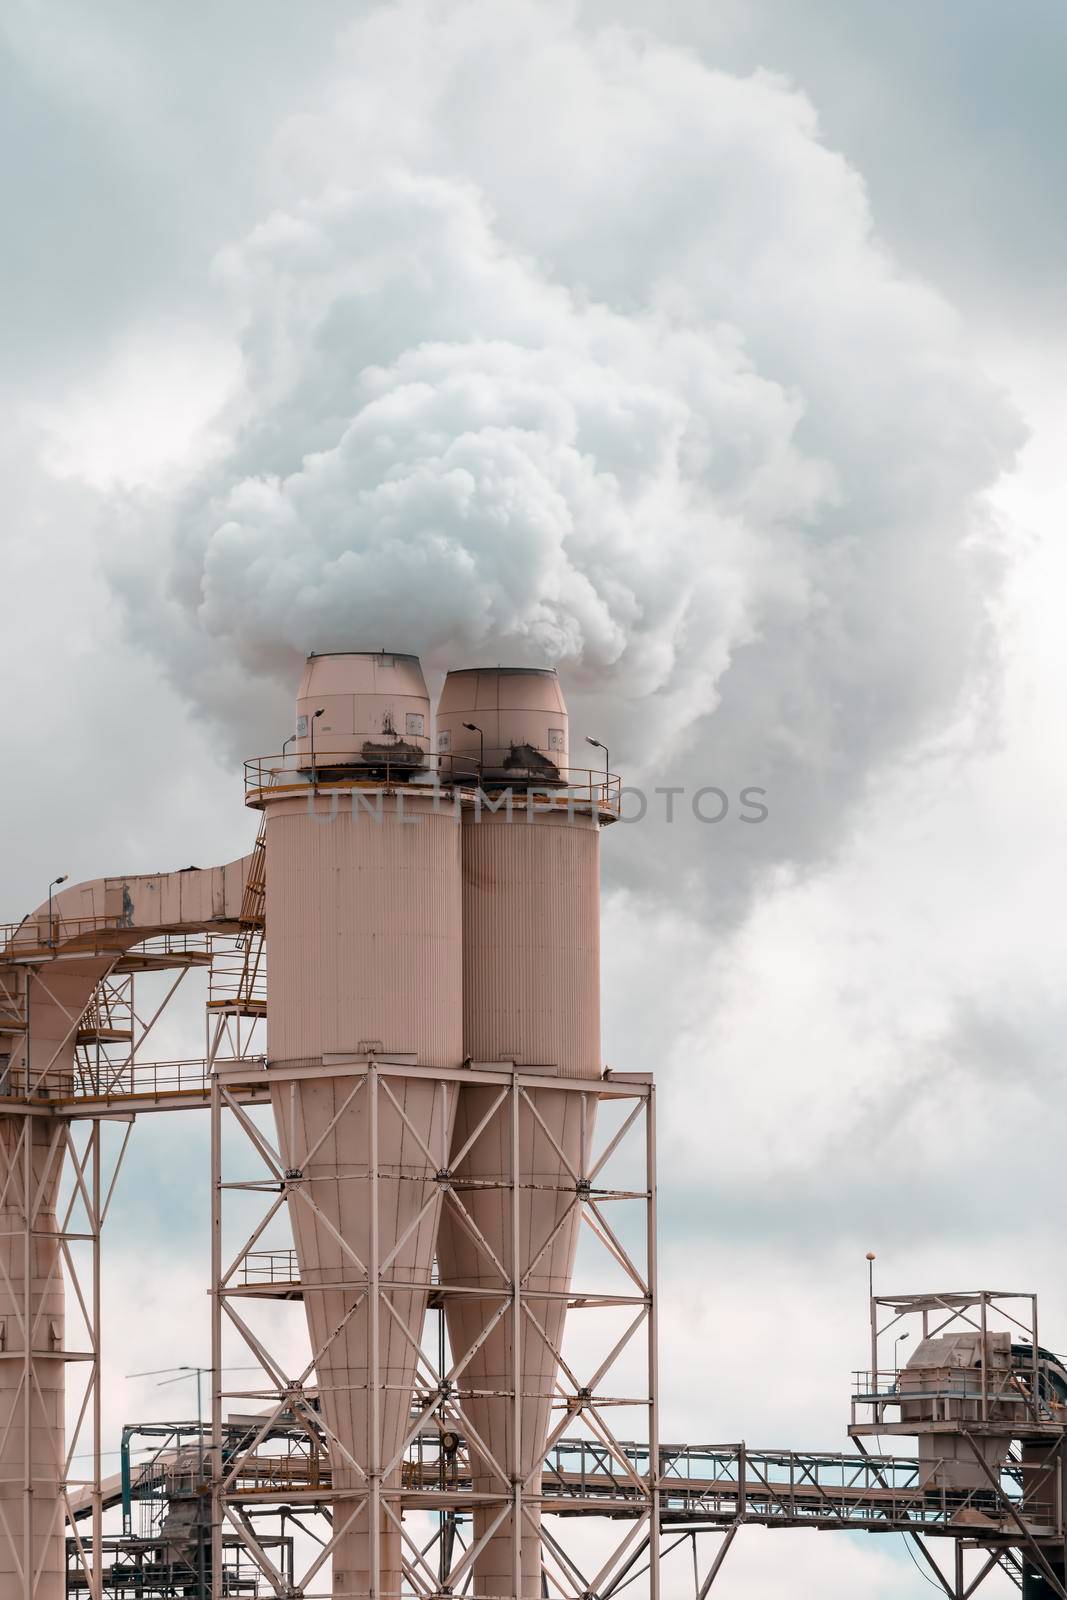 A large manufacturing facility with steam coming from chimney st by WittkePhotos